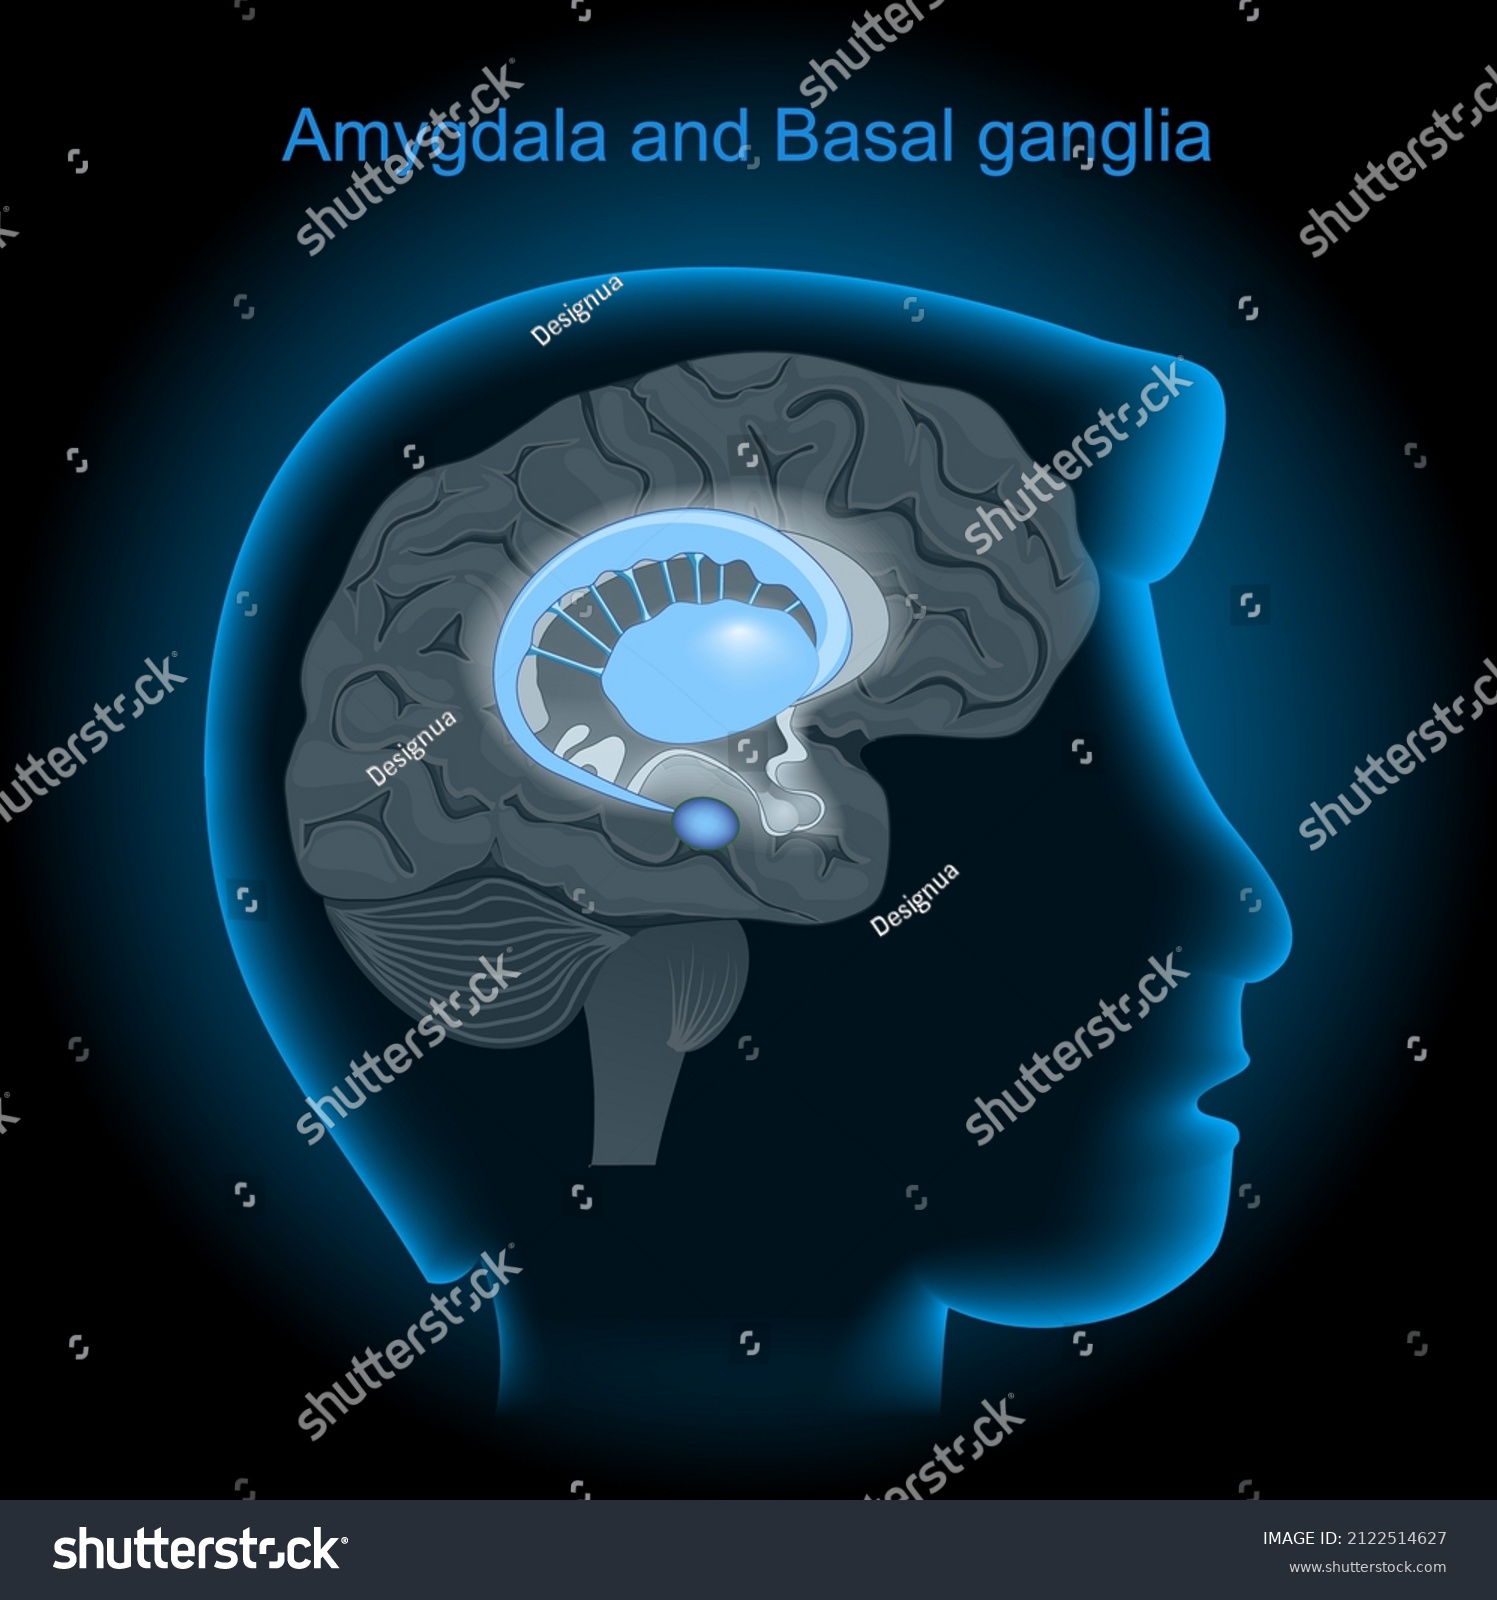 SVG of Location of the amygdalae and basal ganglia in the human brain. Amygdala and Limbic system. Human's head with brain on dark background. side view of basal nuclei. Vector poster svg